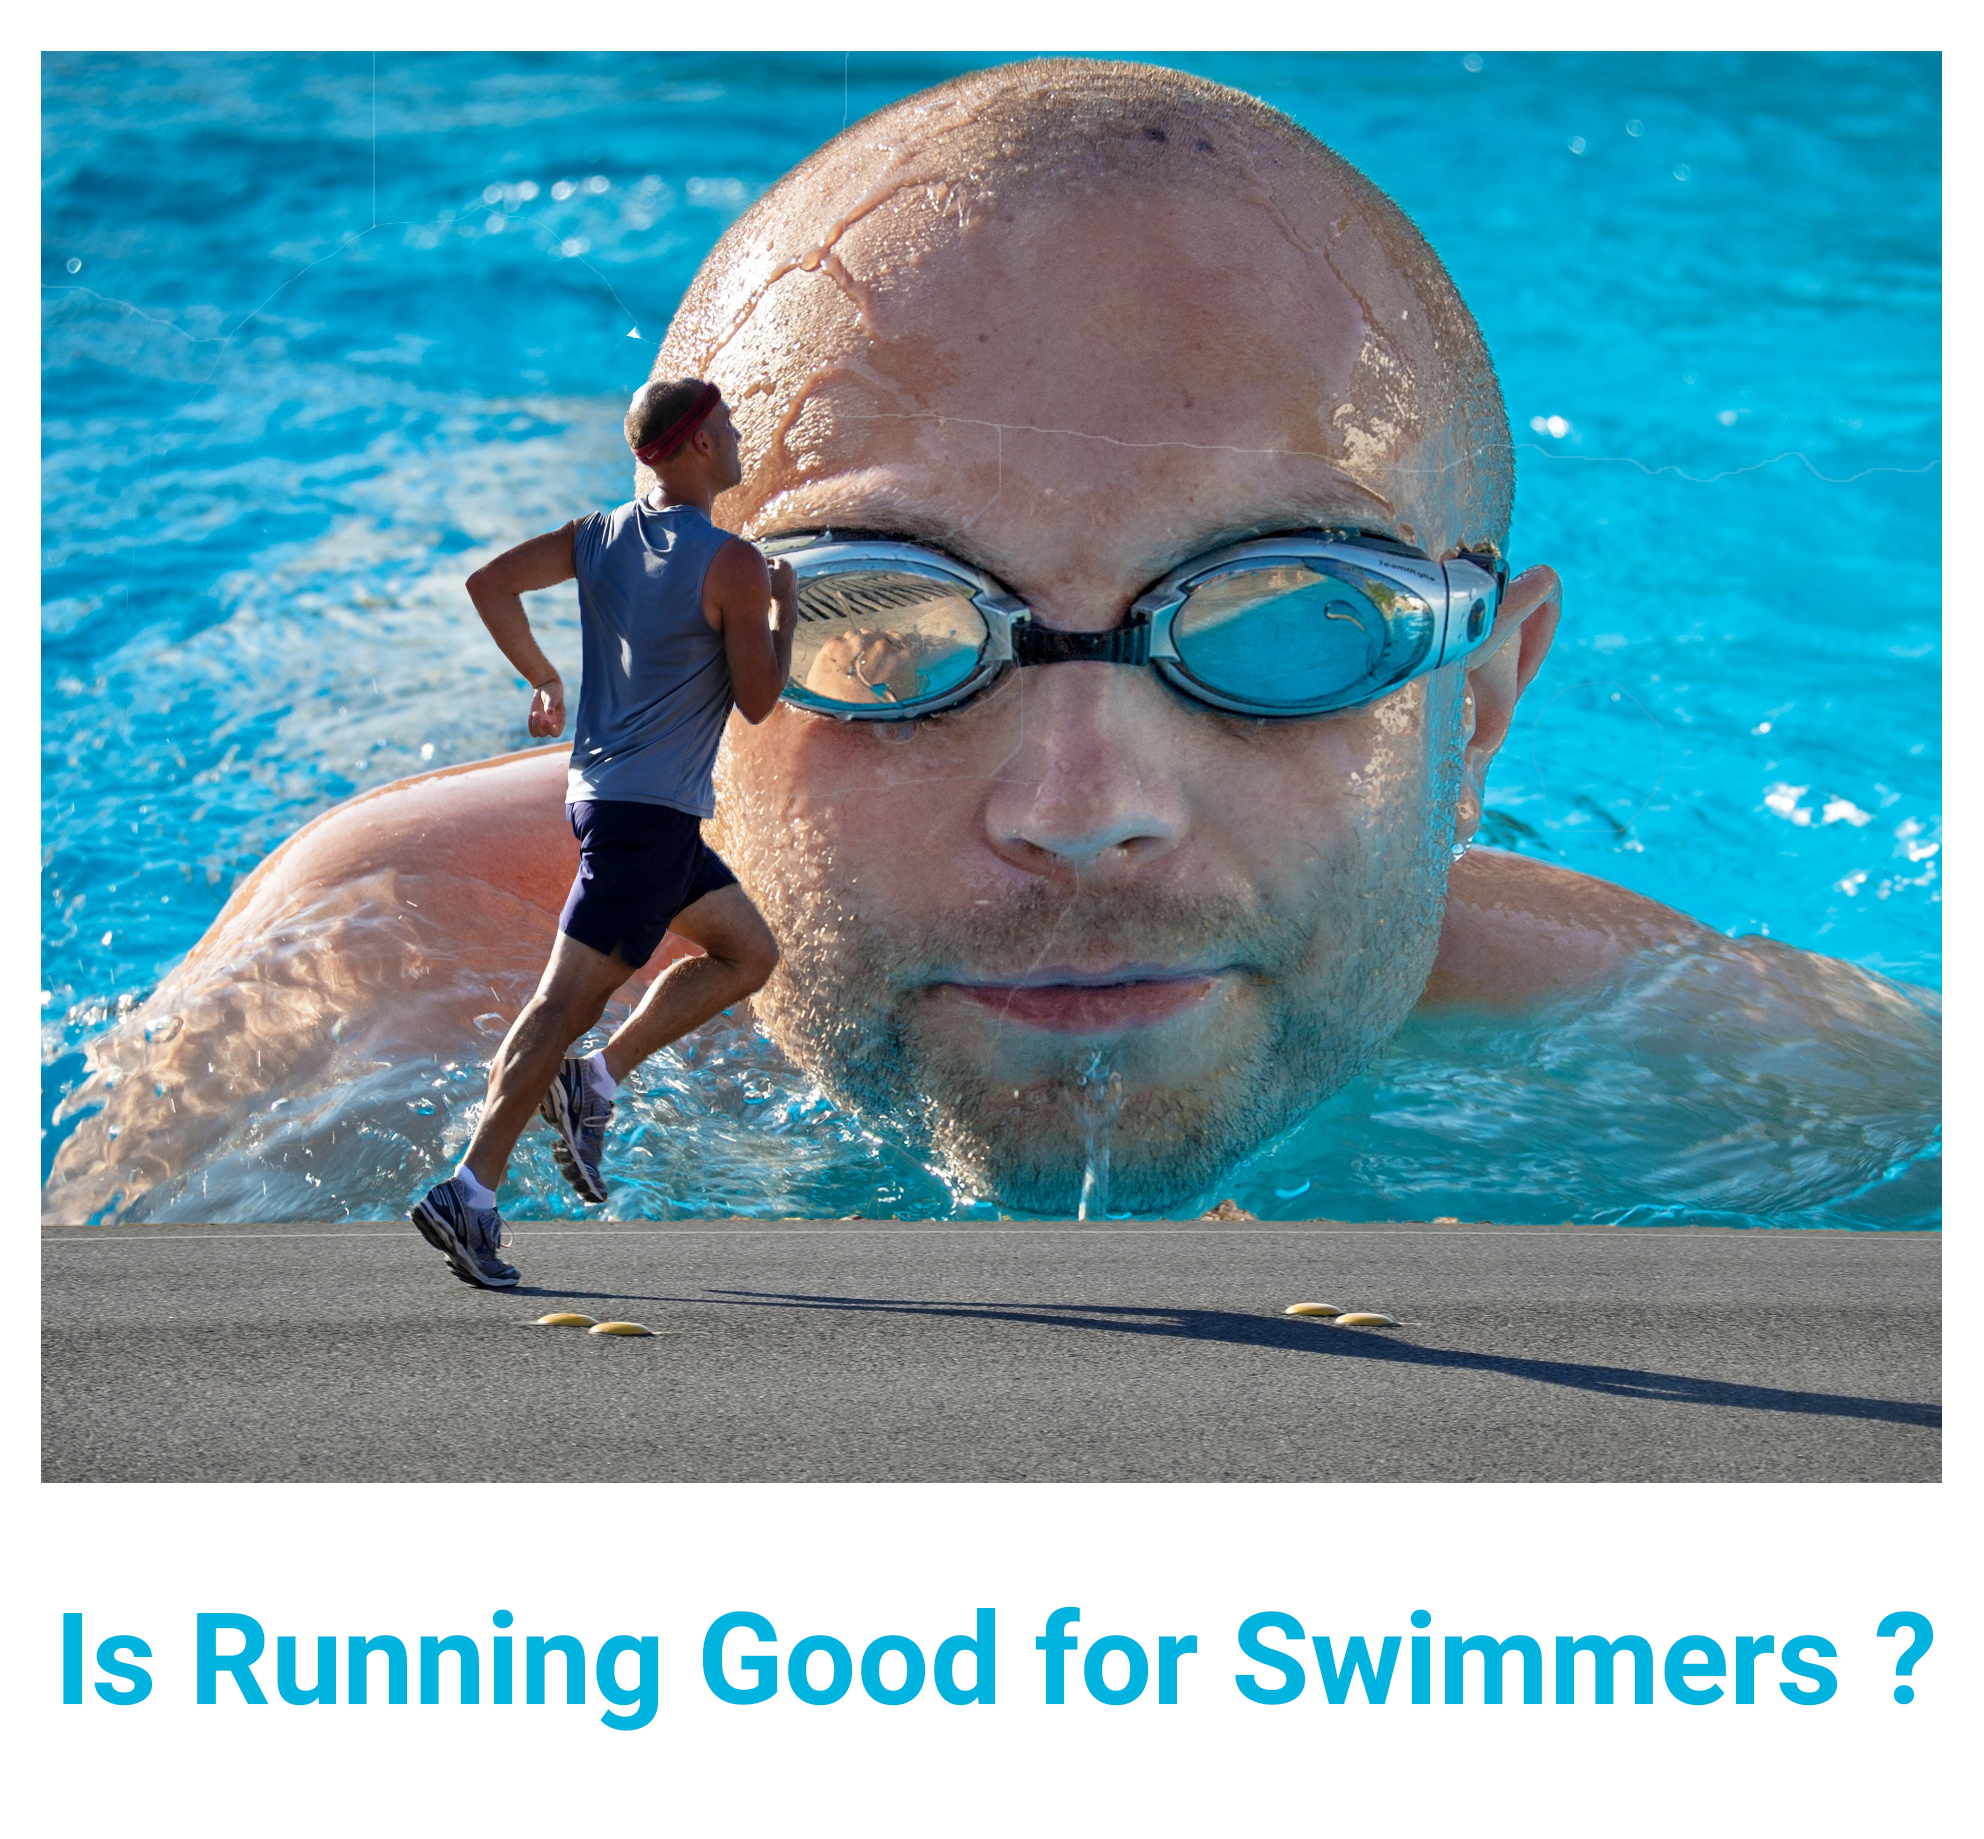 Is running good for swimmers?